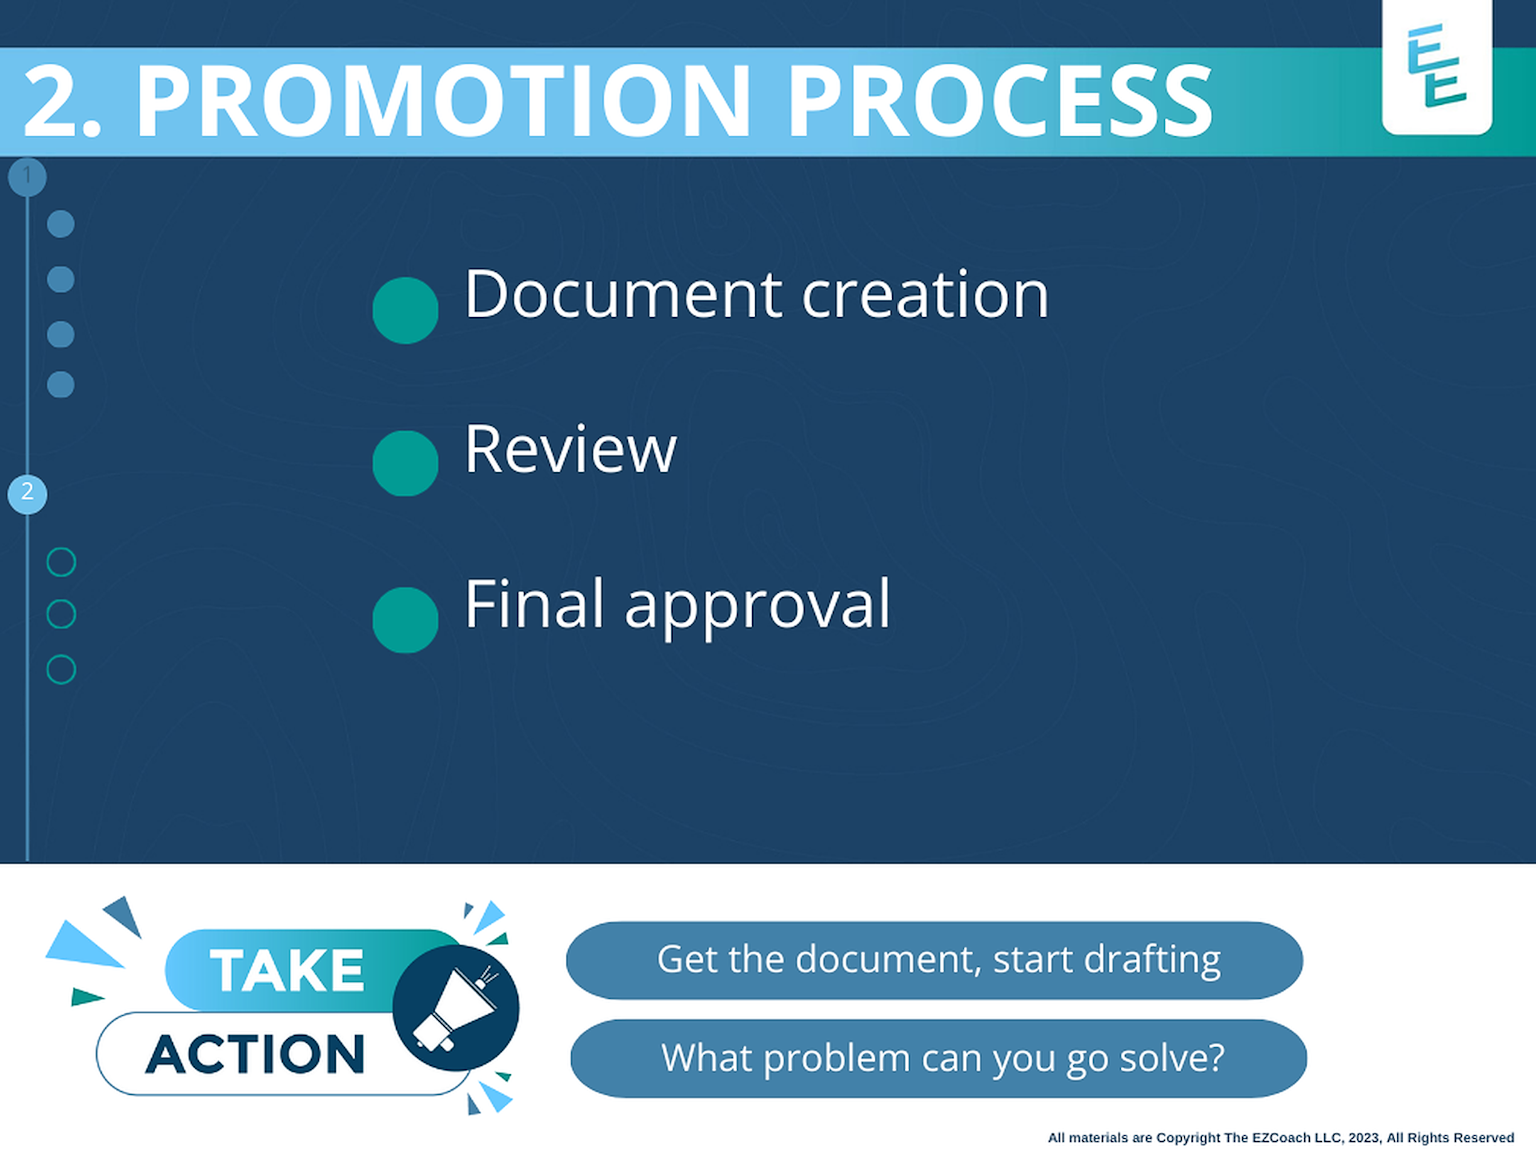 We will DIVE DEEP on the promotion process from the executive's POV and common mistakes to avoid